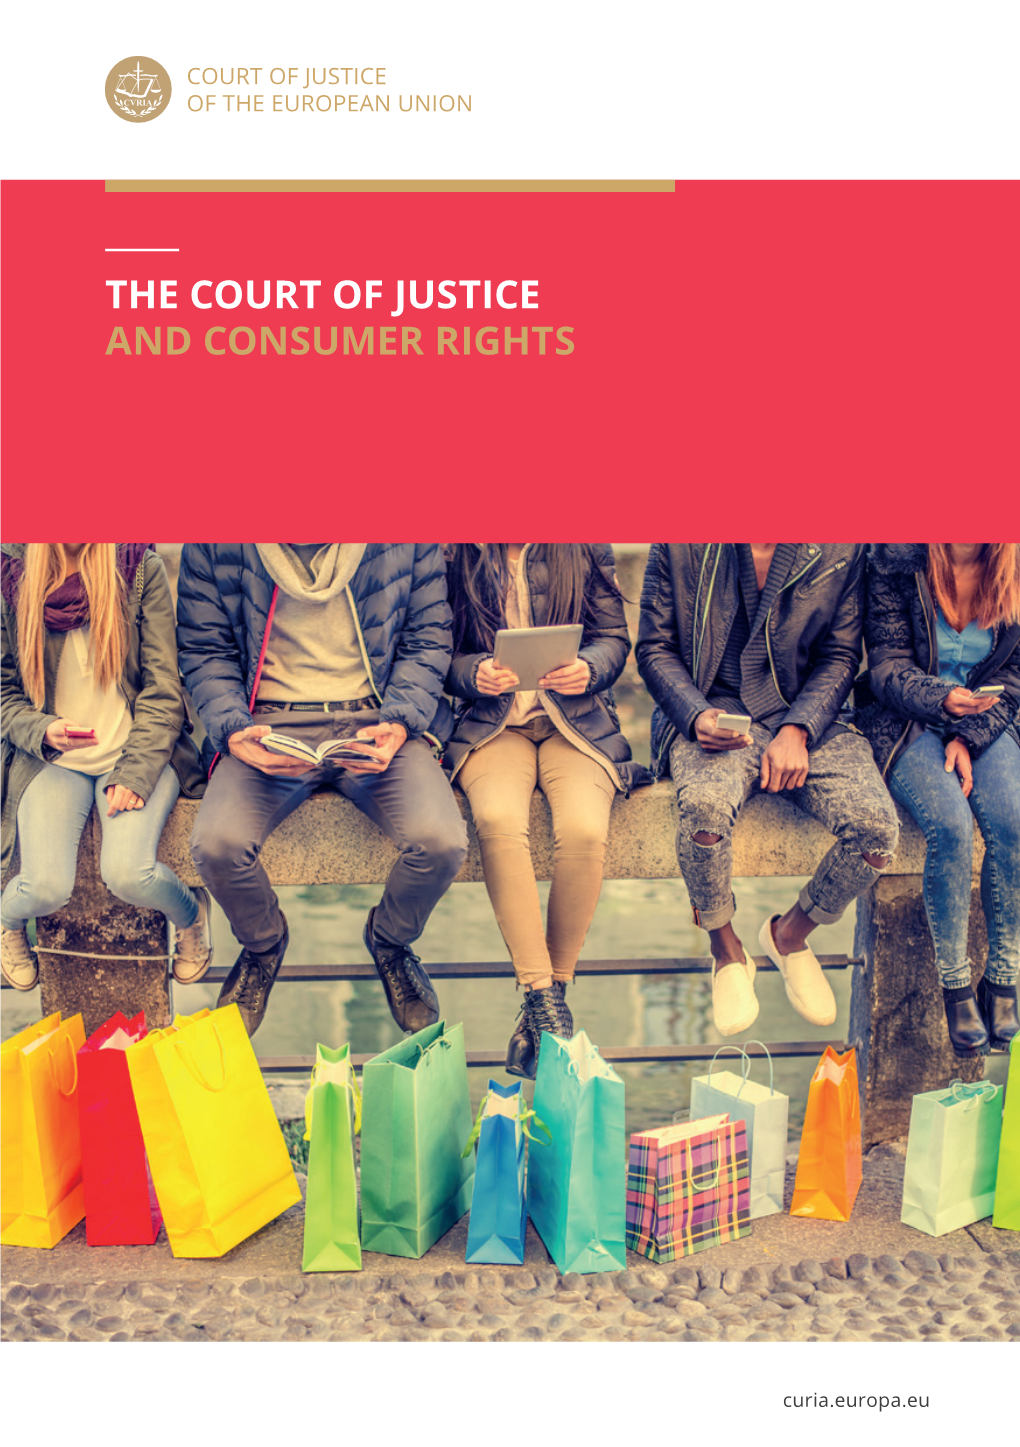 The Court of Justice and Consumer Rights